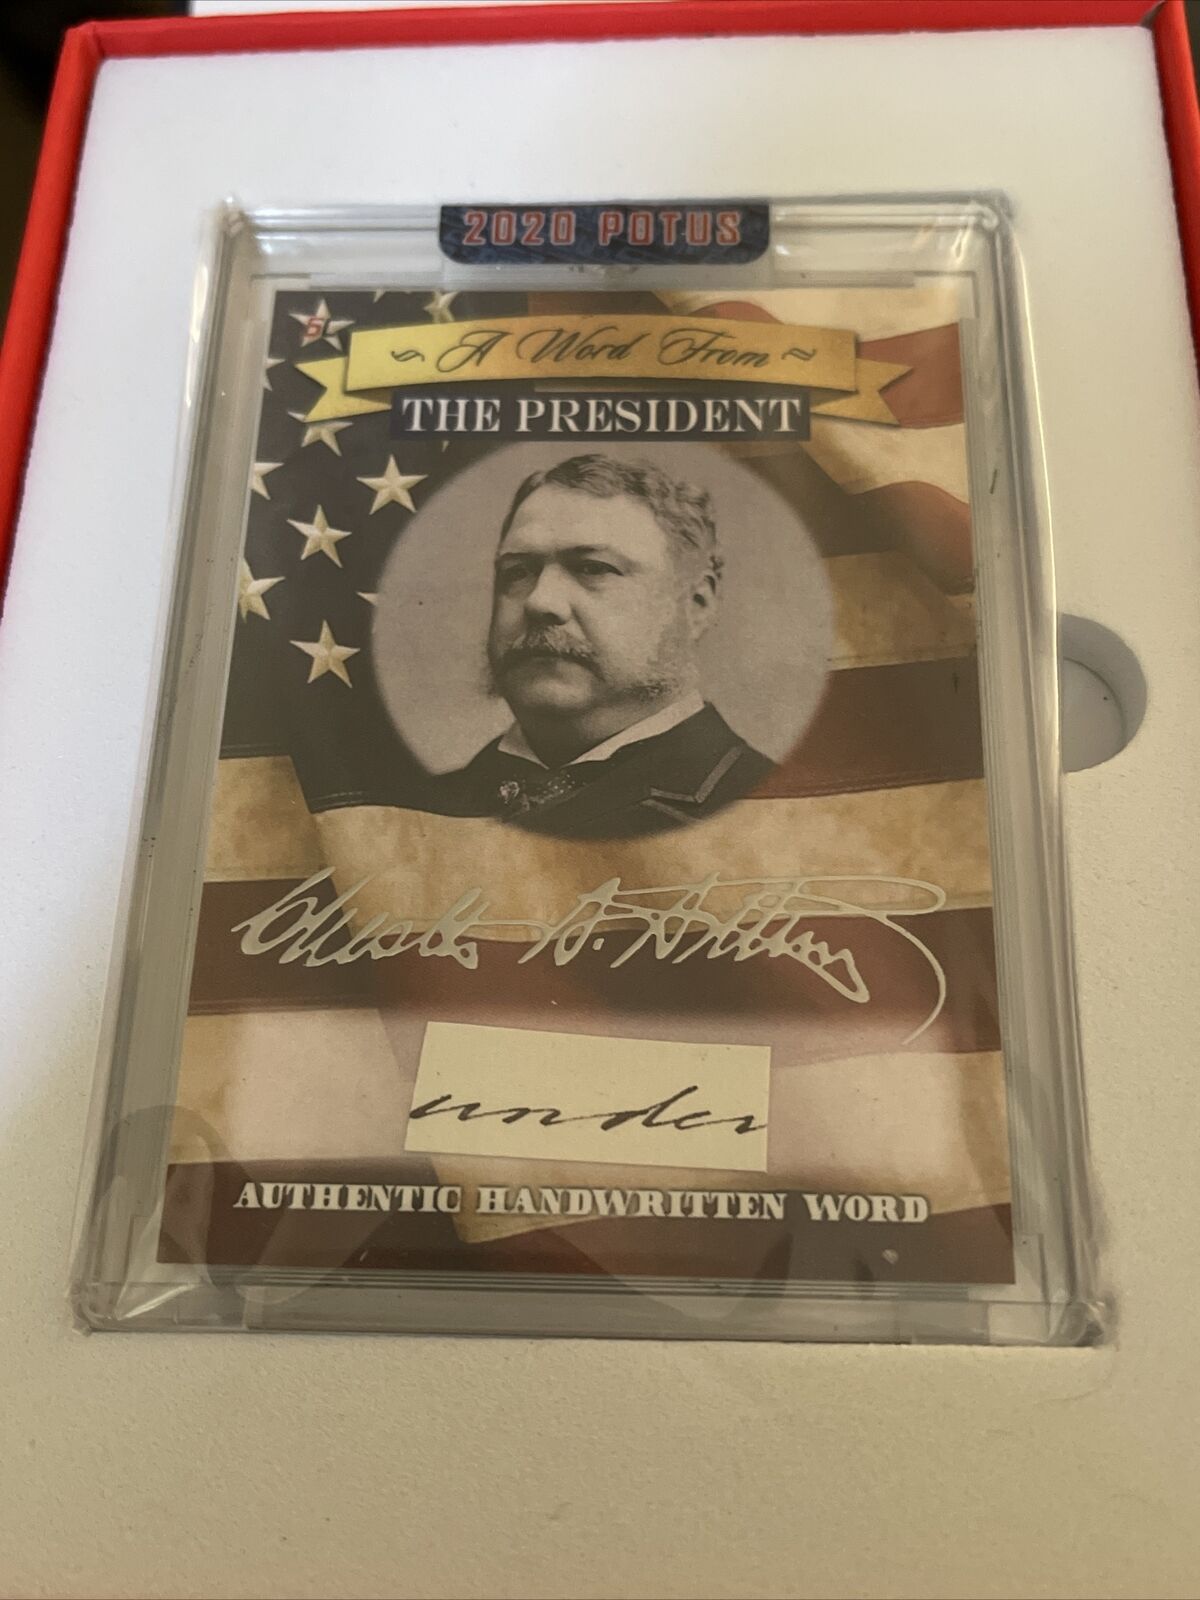 2020 POTUS A Word From The President CHESTER A. ARTHUR Handwritten Word Card